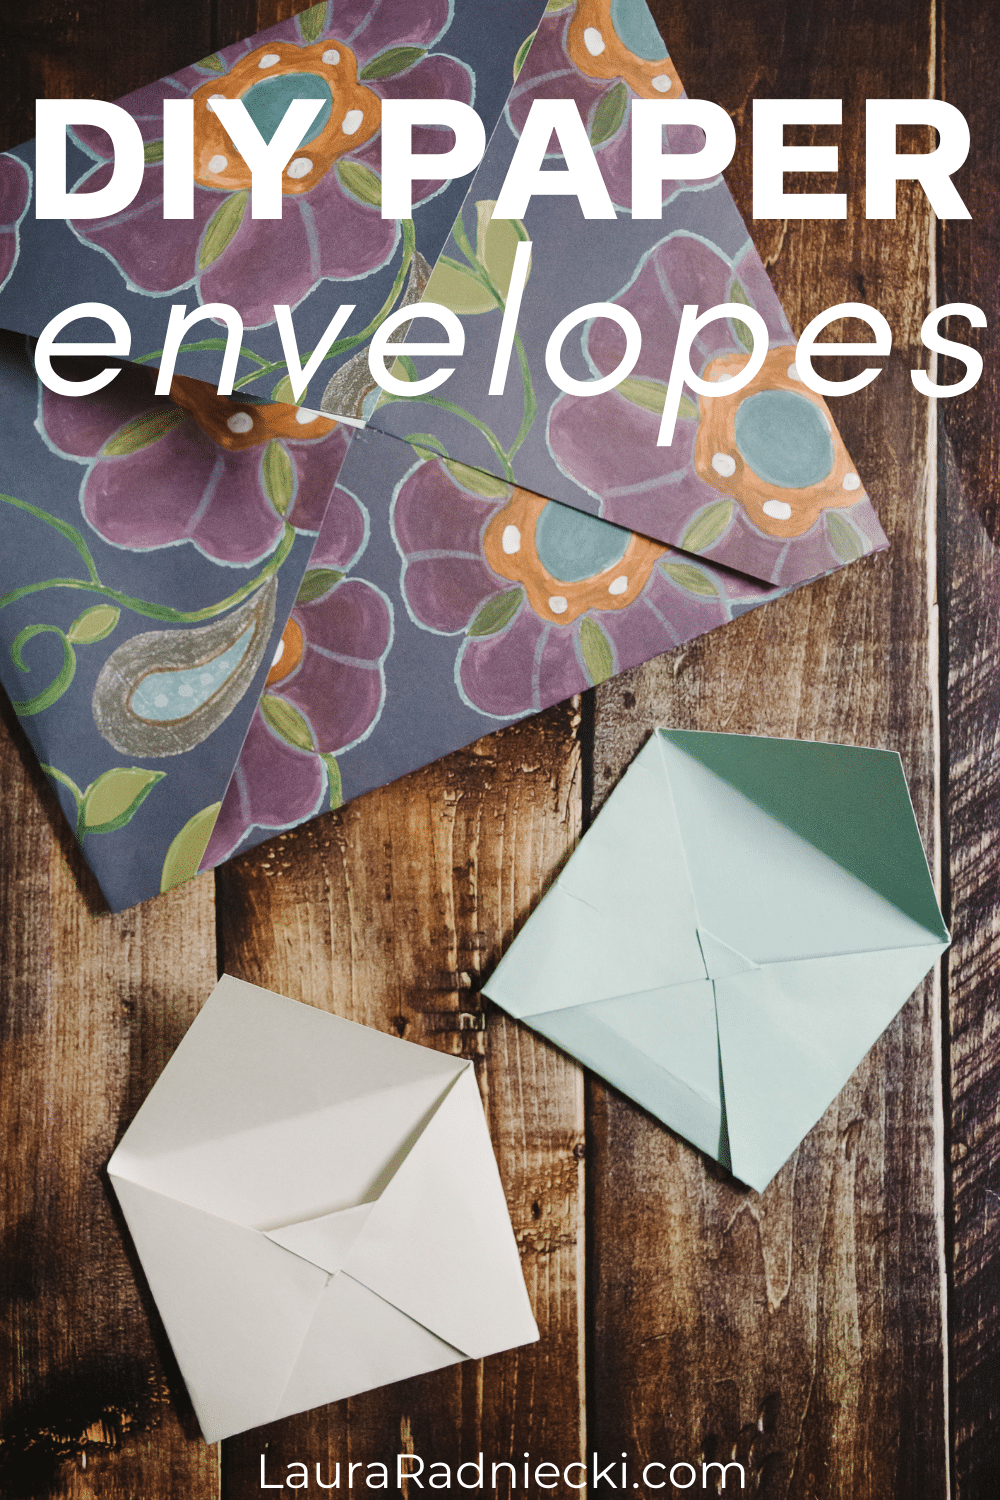 How to Make an Envelope Out of Paper